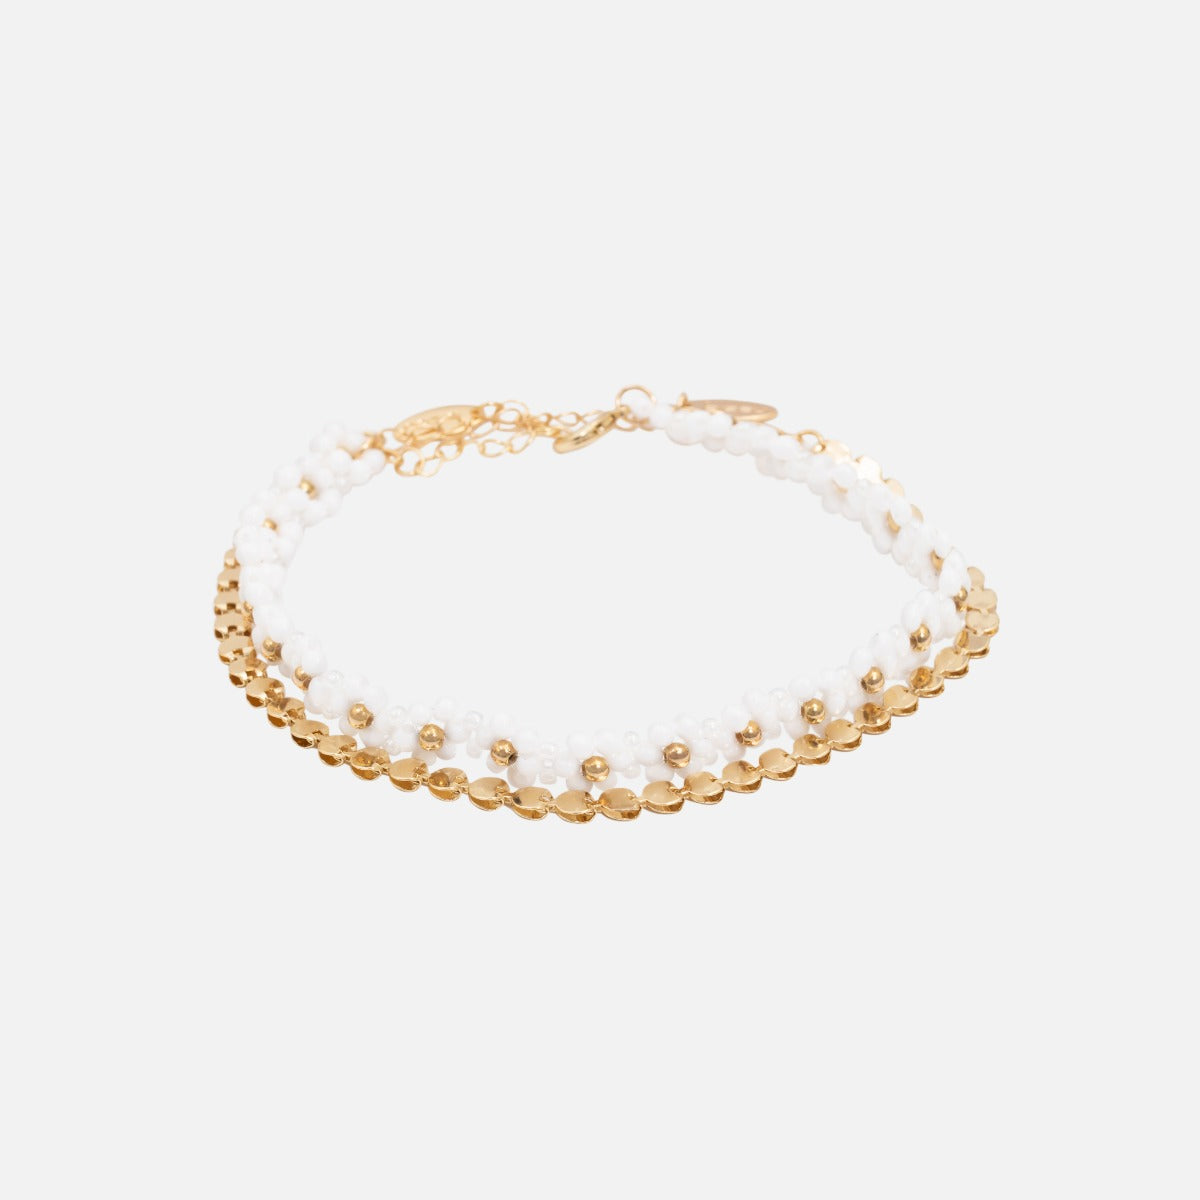 Golden beads and white daisies ankle chains